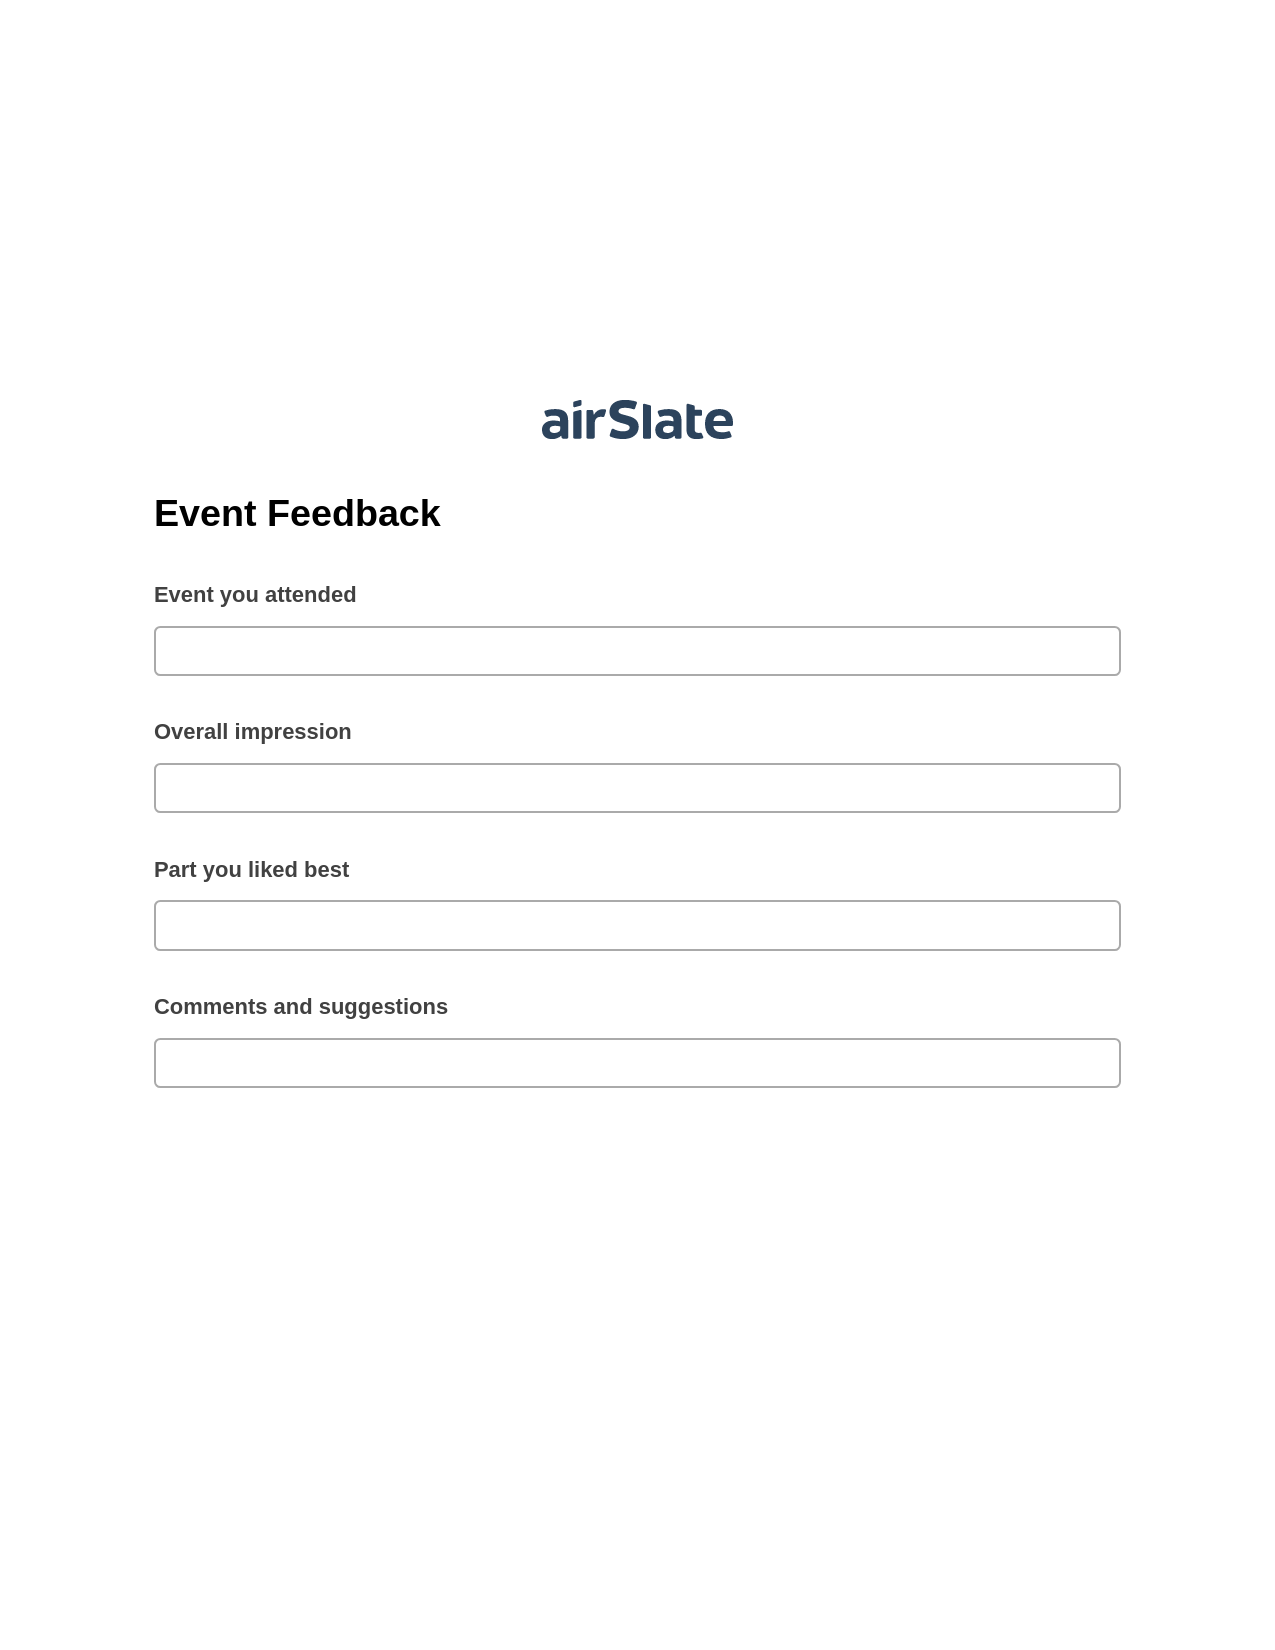 Event Feedback Pre-fill from another Slate Bot, Update Salesforce Record Bot, Webhook Postfinish Bot